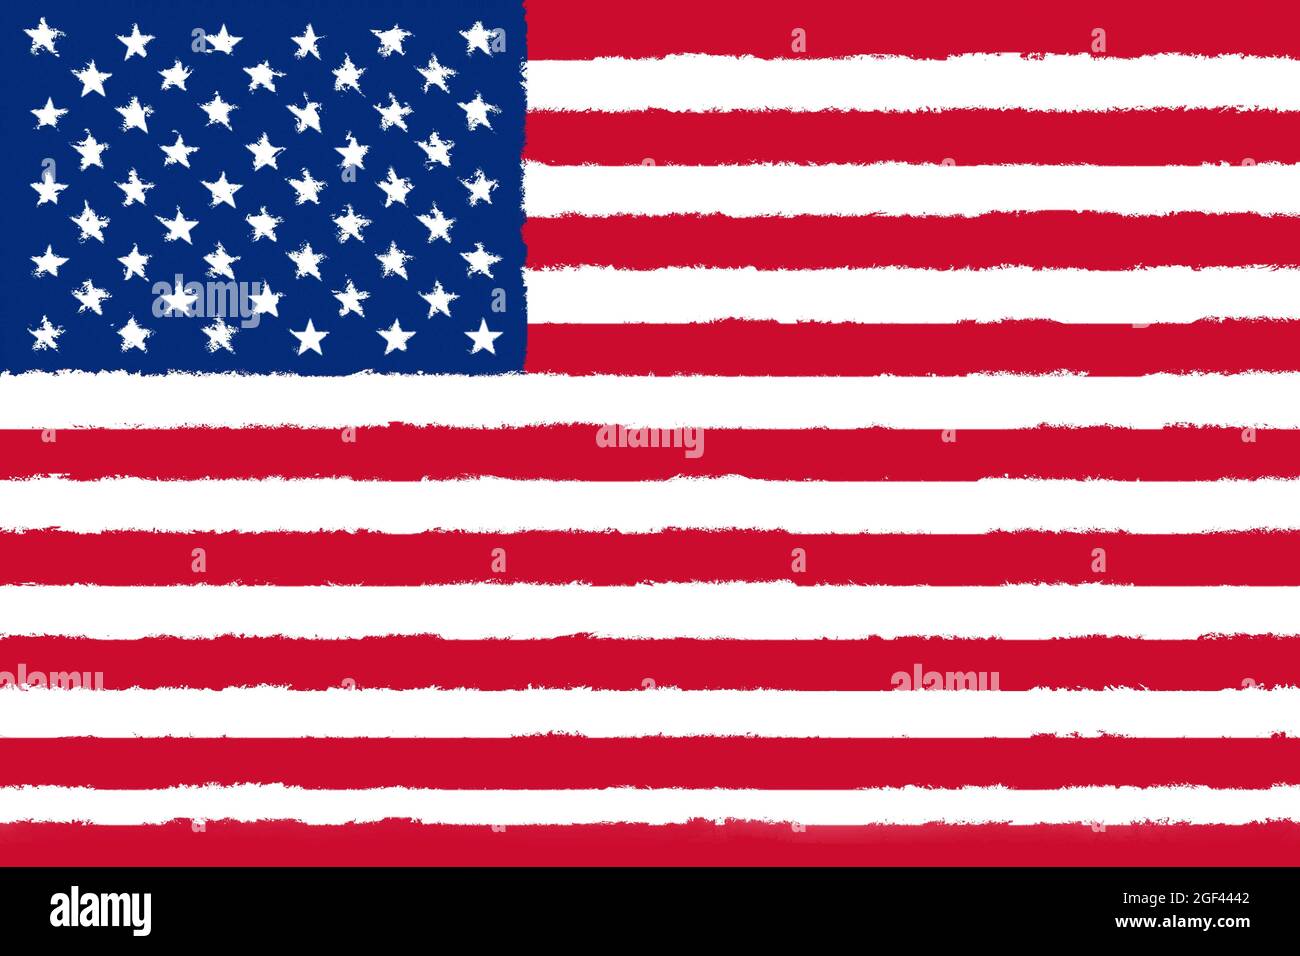 Flag of Uited States of America grunge looking 3D illustration. Stock Photo